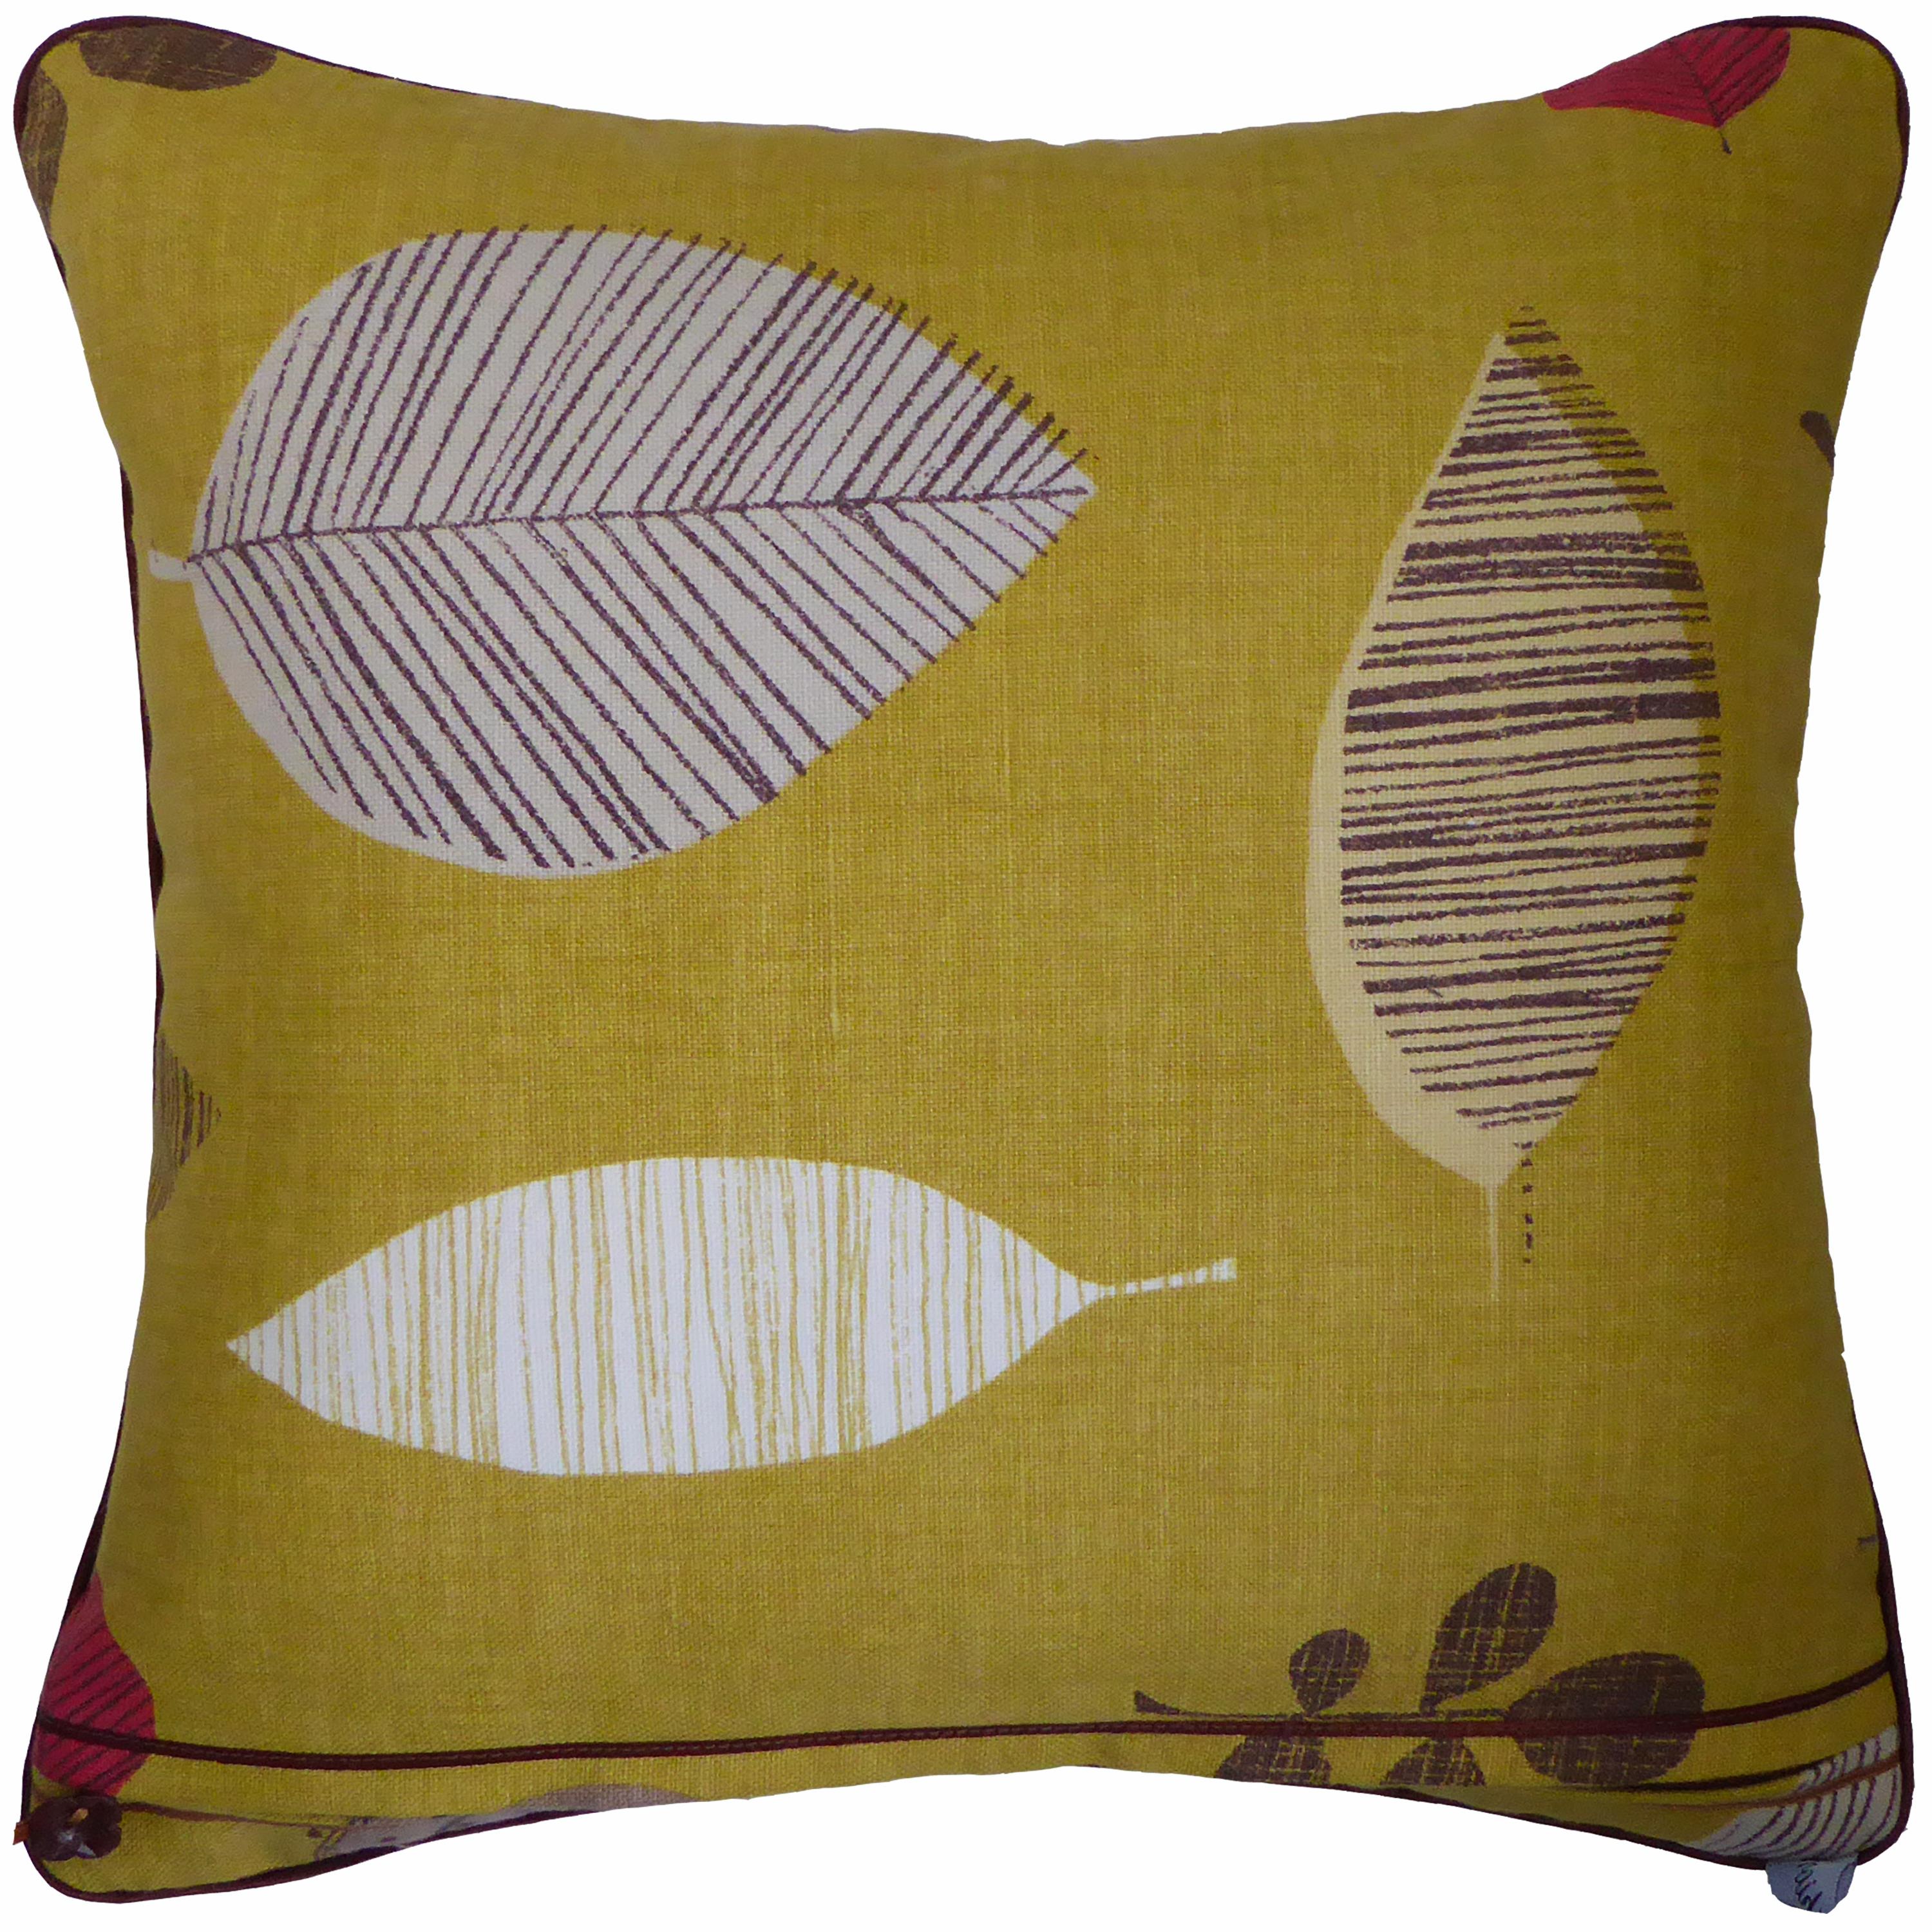 Organic Modern ‘Vintage Cushions’ Luxury Bespoke-Made Pillow 'Perry Green'  Made in London